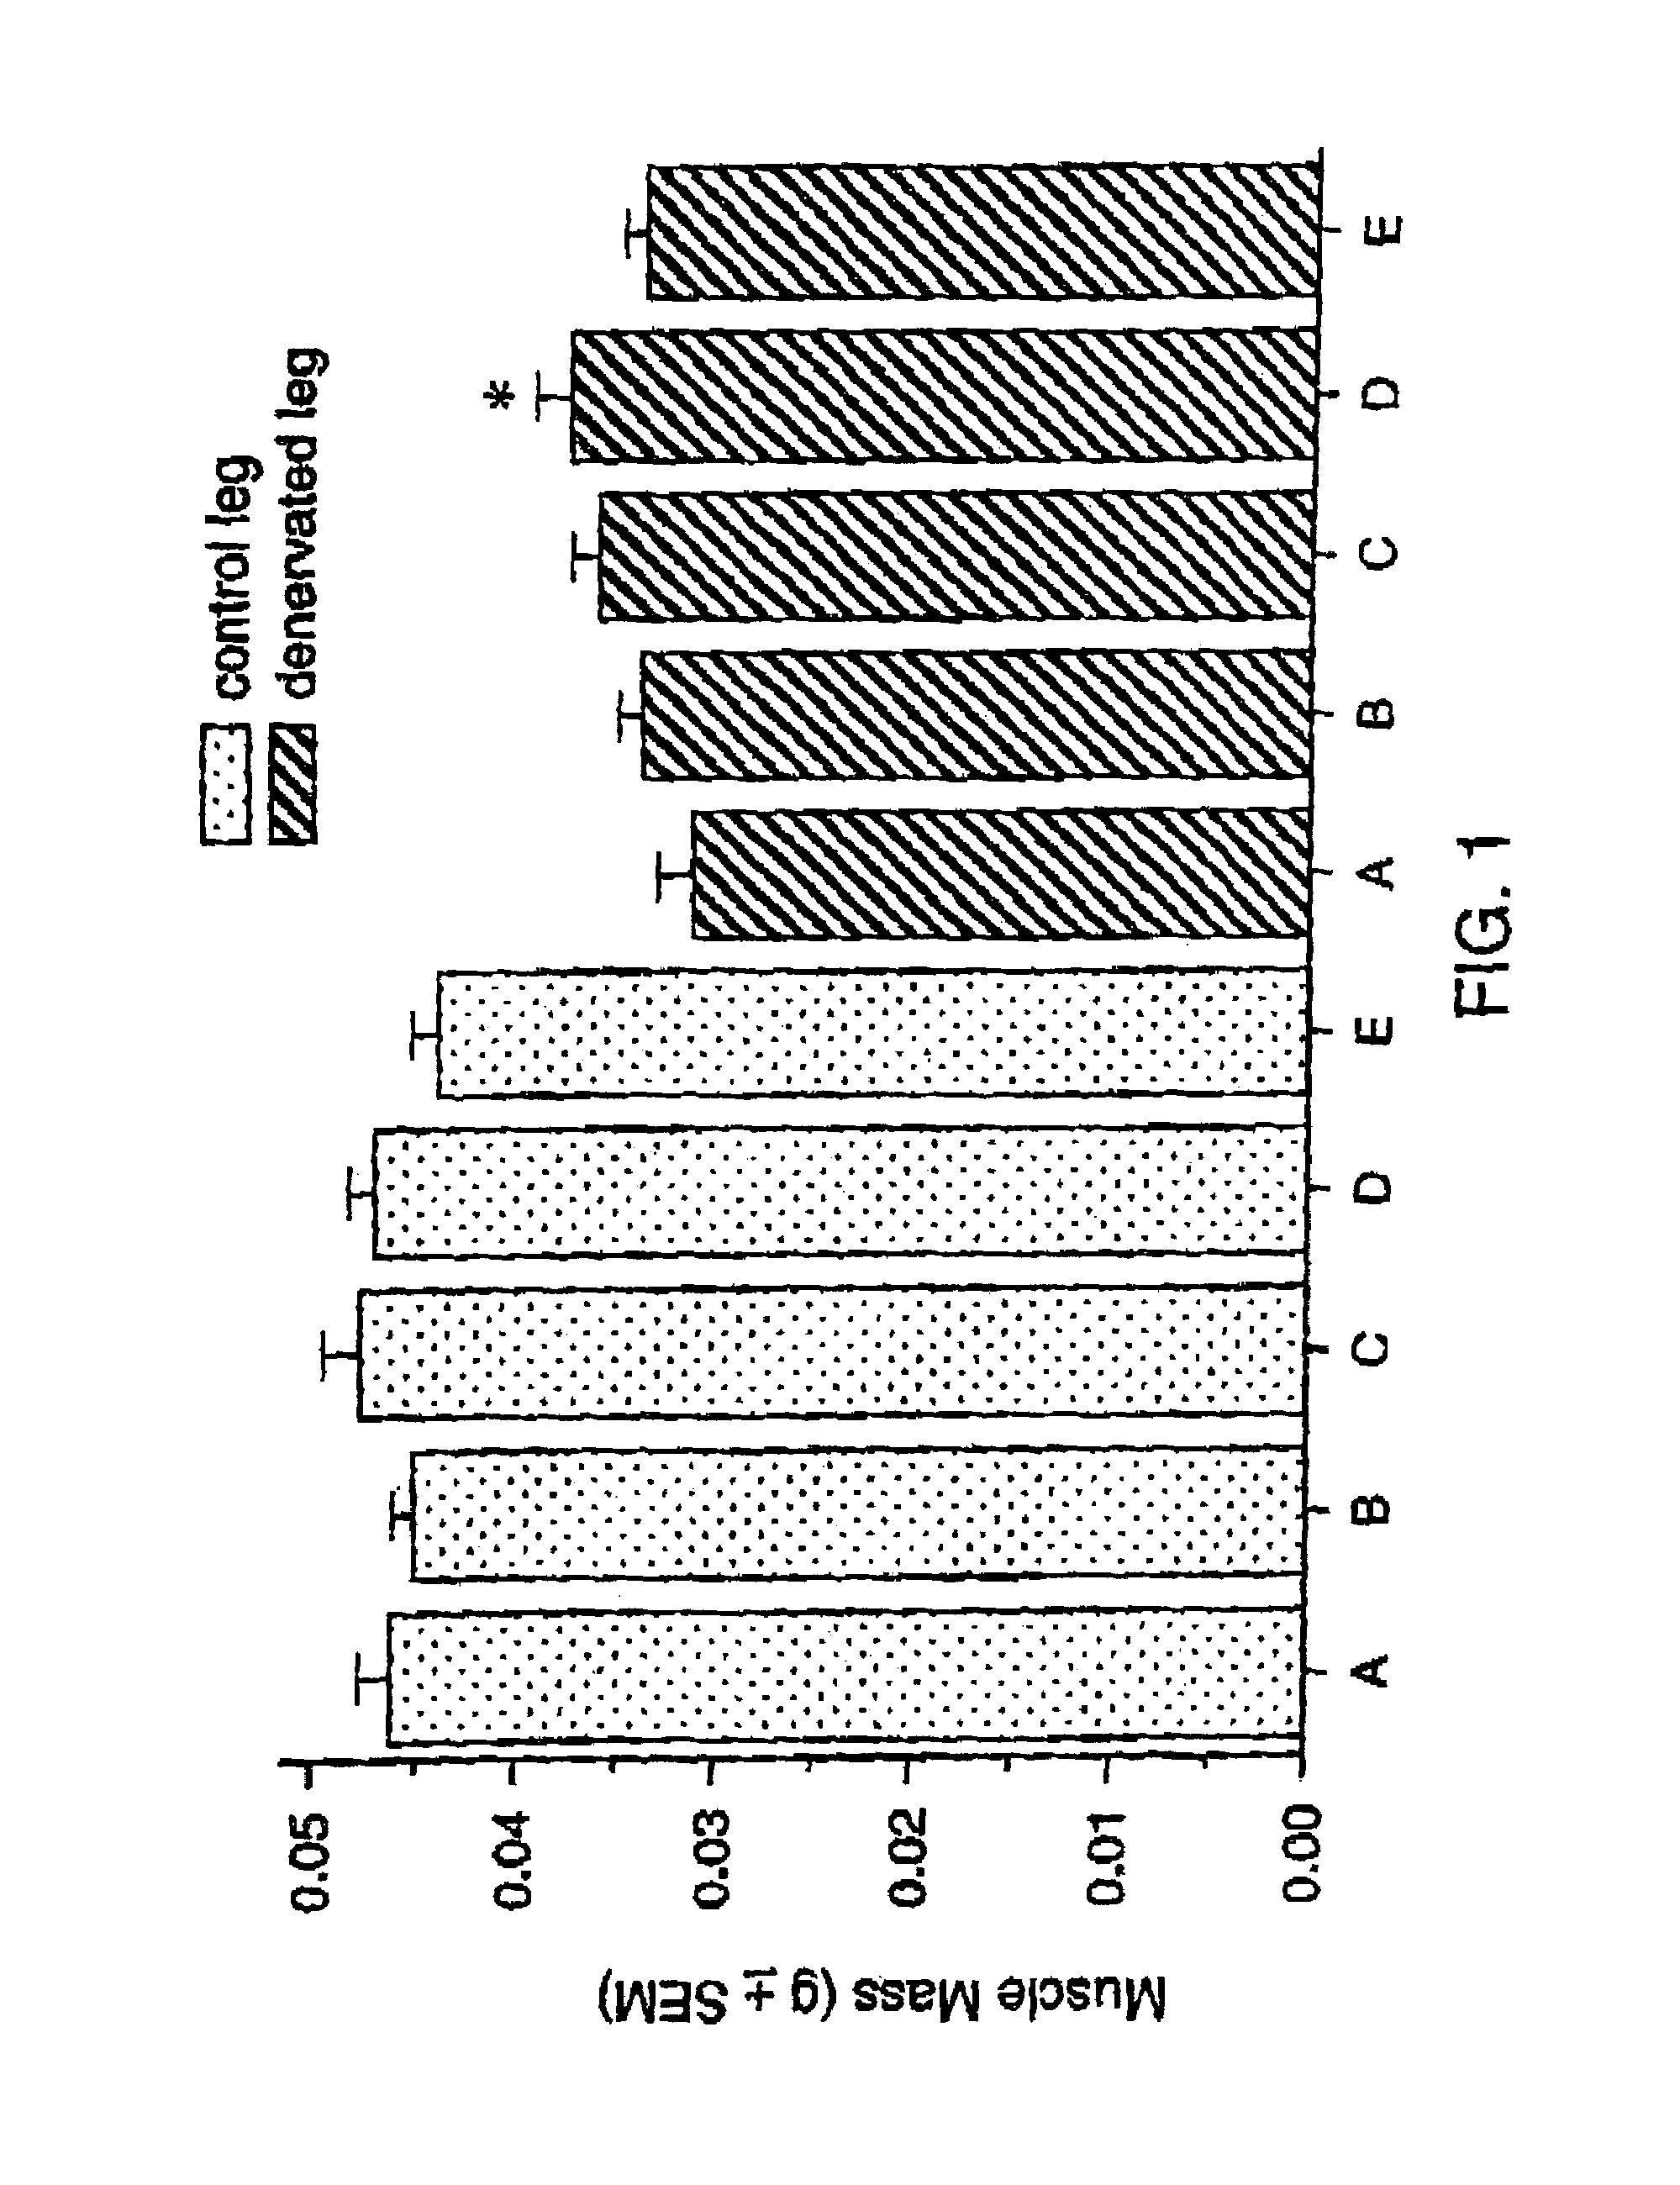 Methods for identifying compounds for regulating muscle mass or function using corticotropin releasing factor receptors